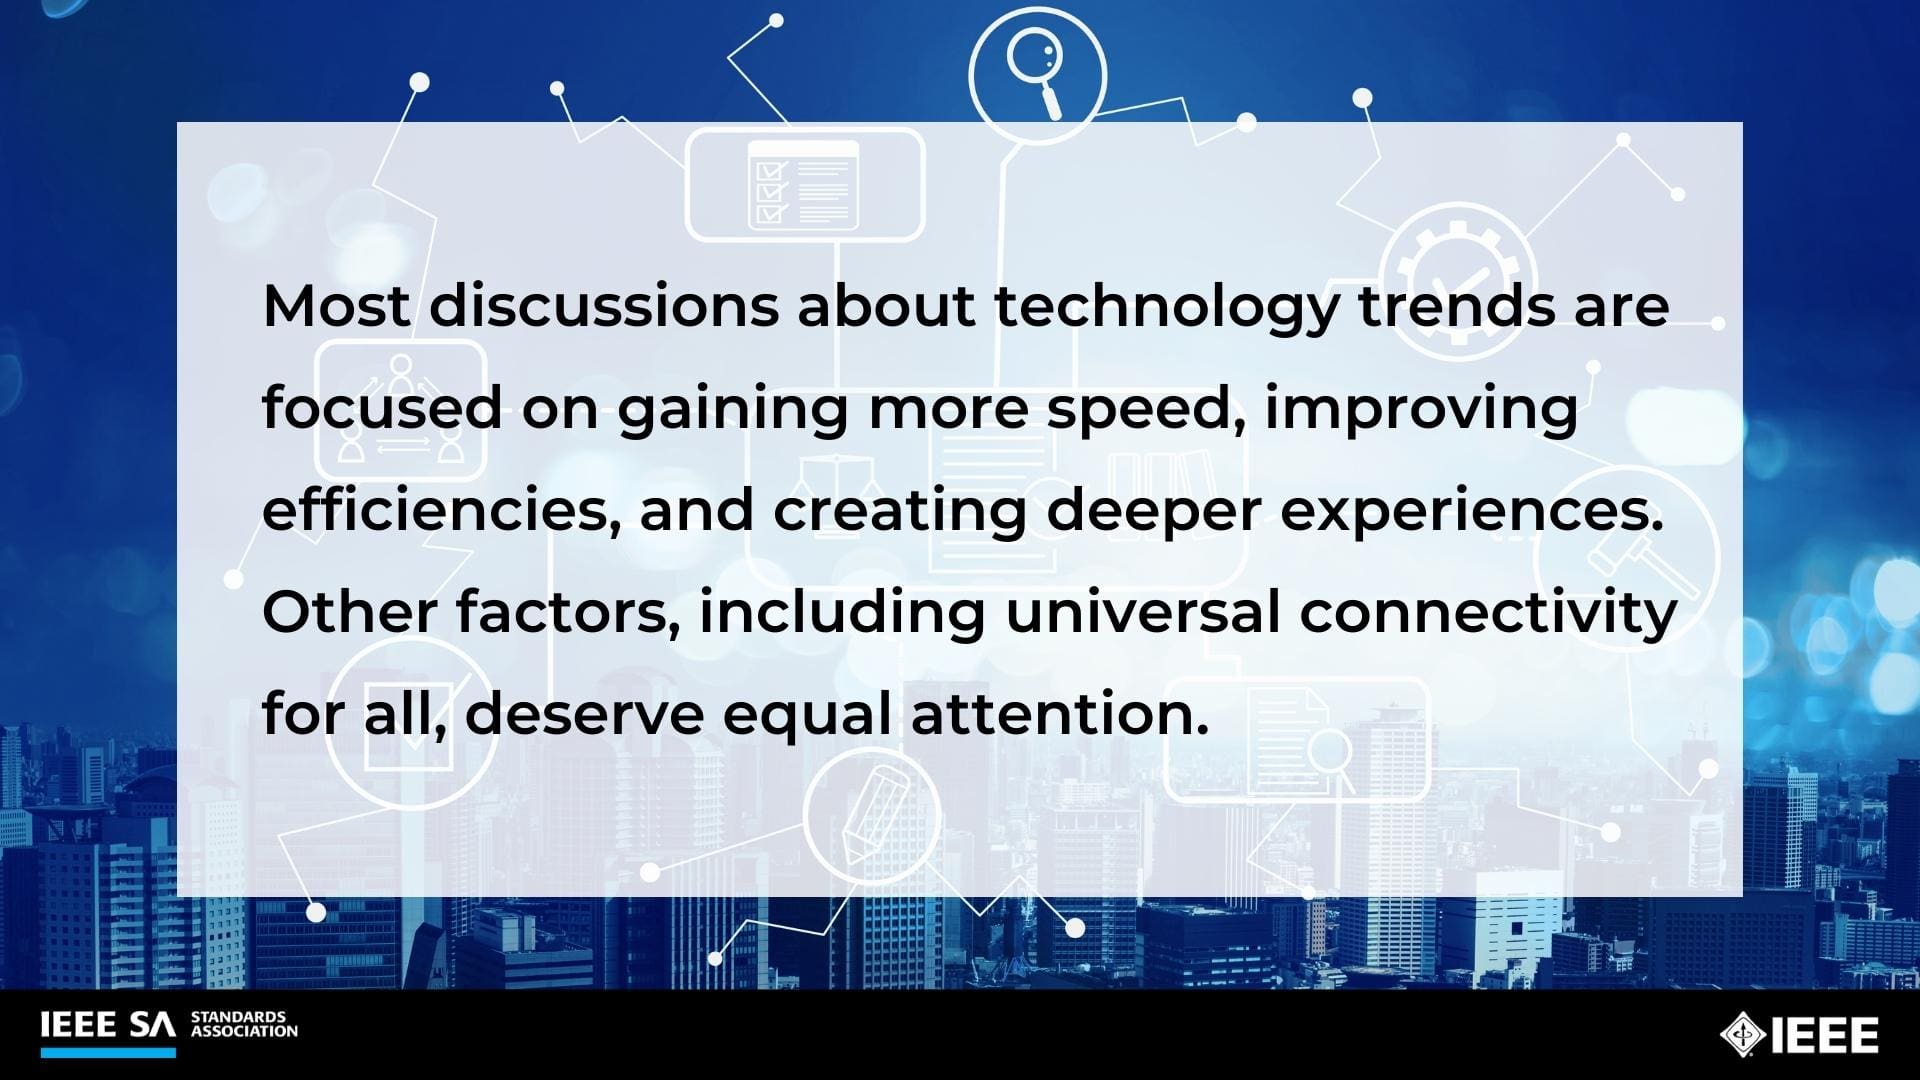 Most discussions about technology trends are focused on gaining more speed, improving efficiencies, and creating deeper experiences. Other factors, including universal connectivity for all, deserve equal attention.